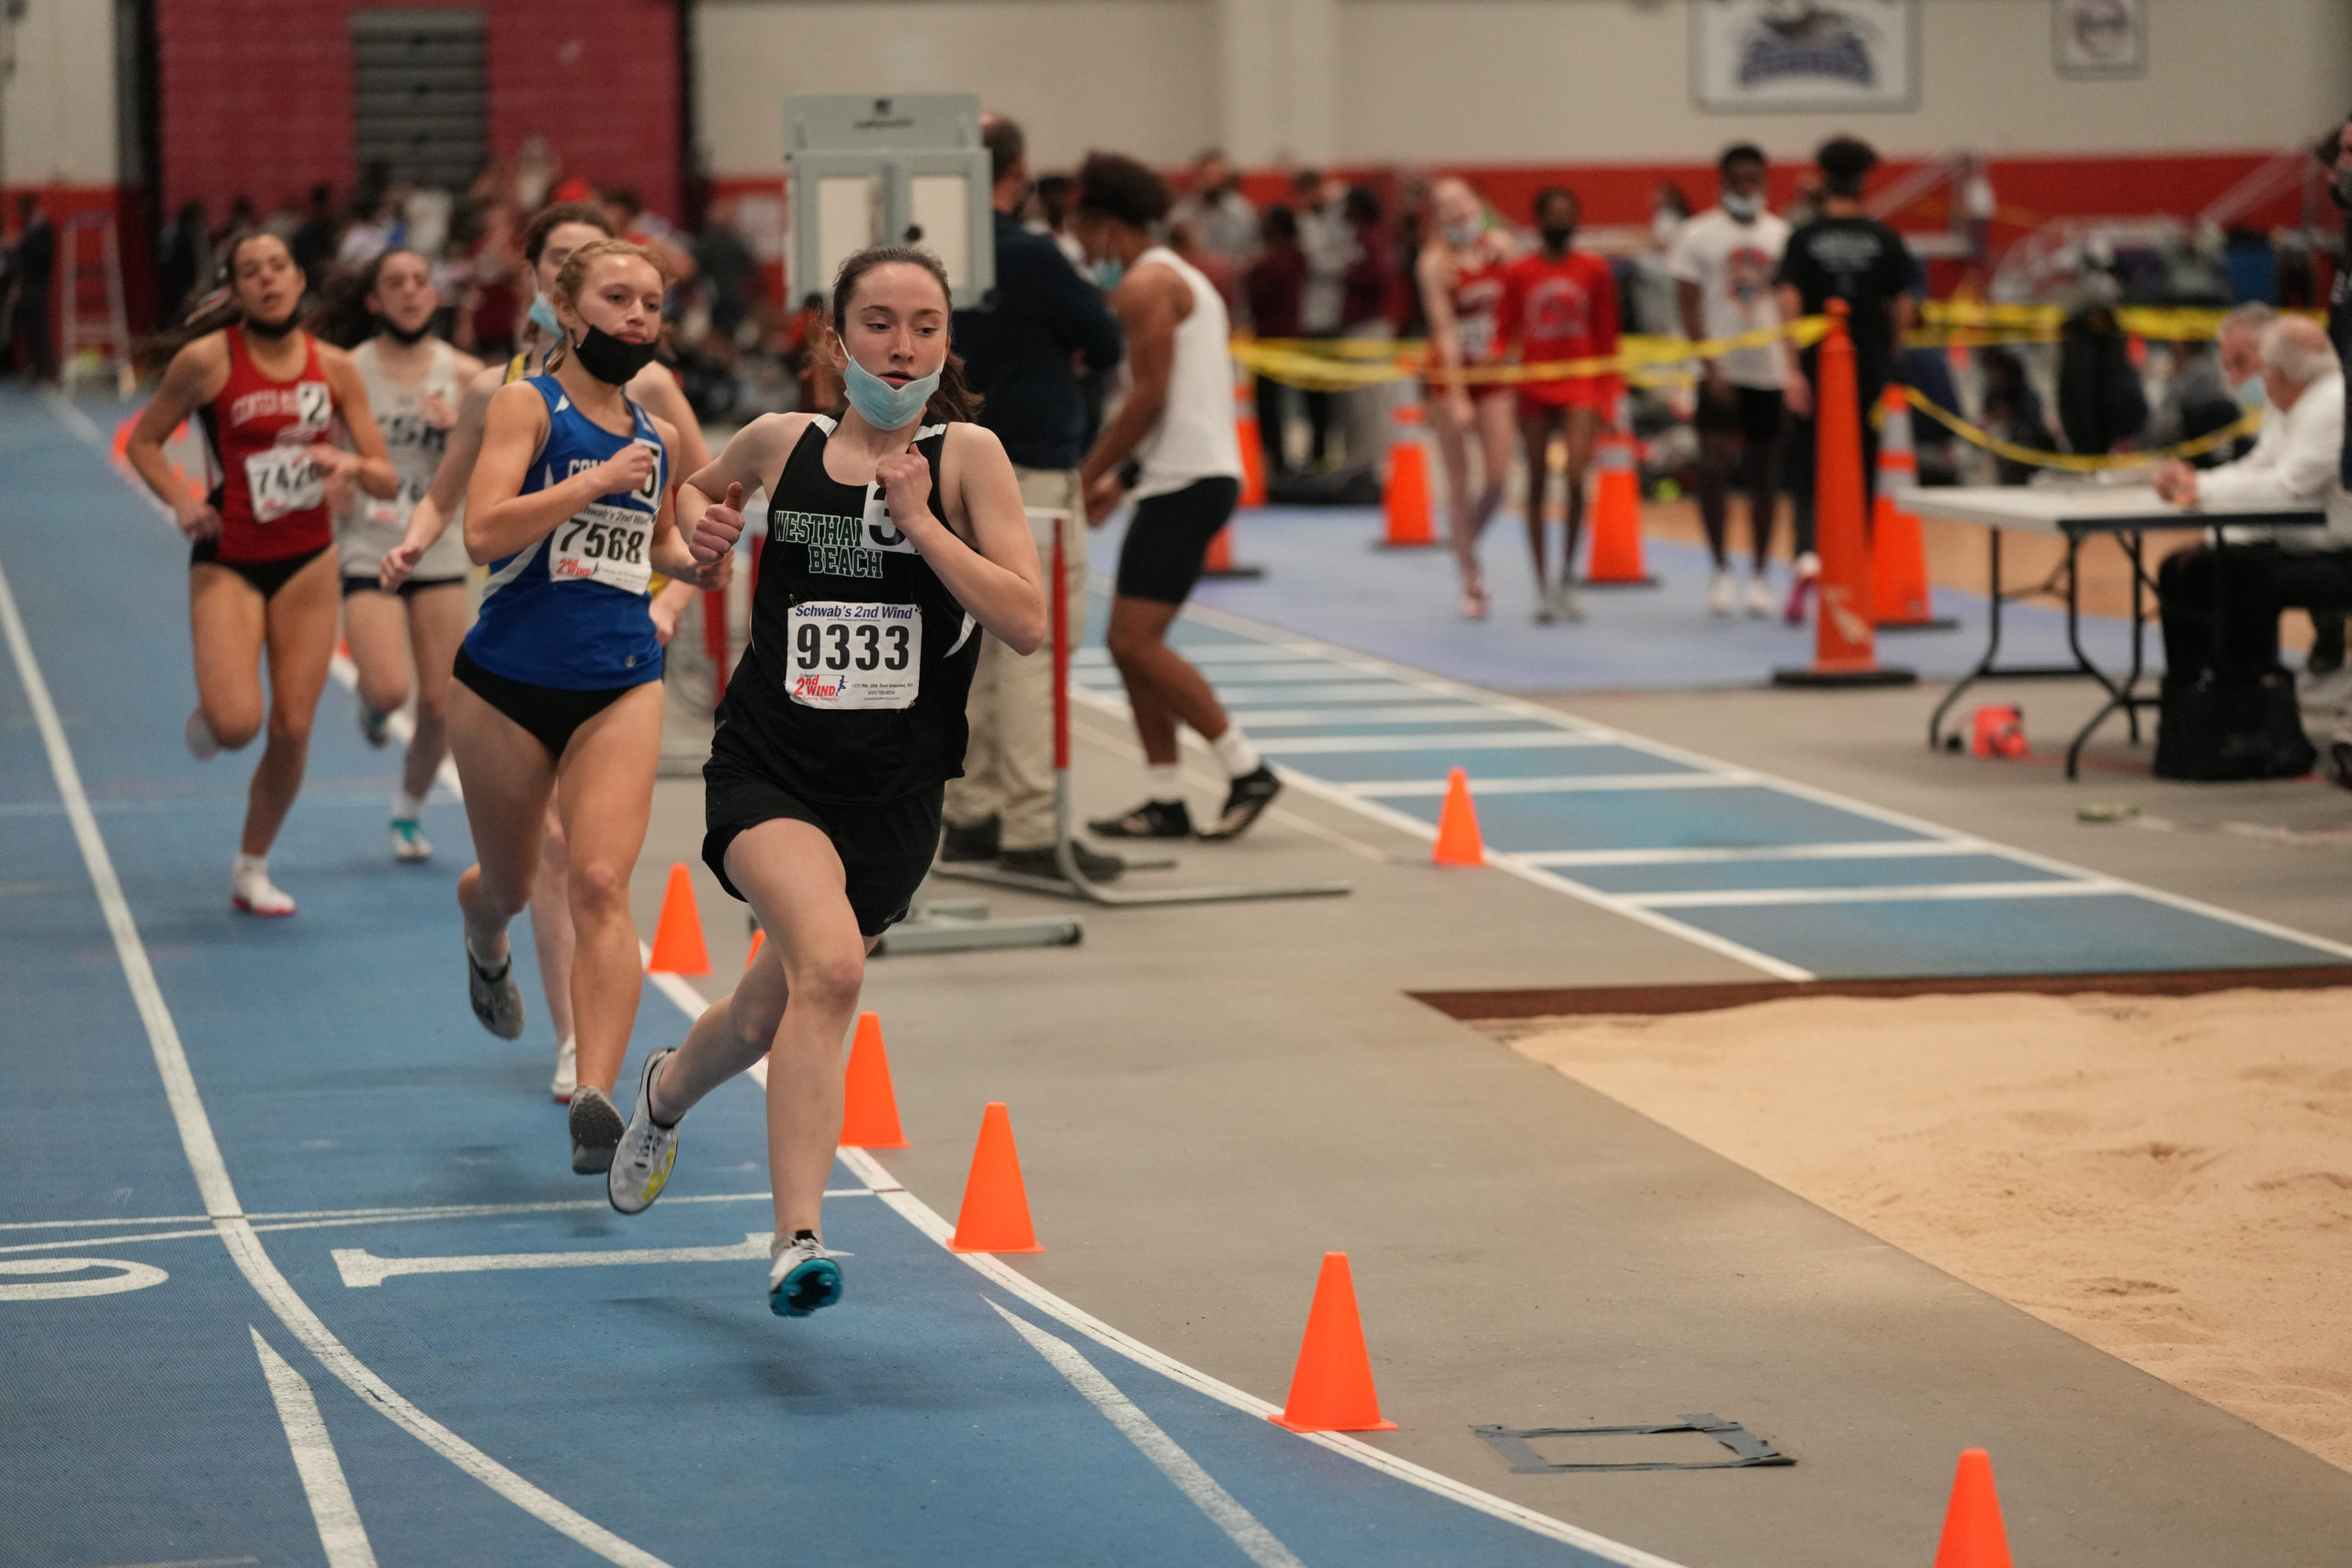 Lily Strebel competes in the relays for Westhampton Beach on Monday night.